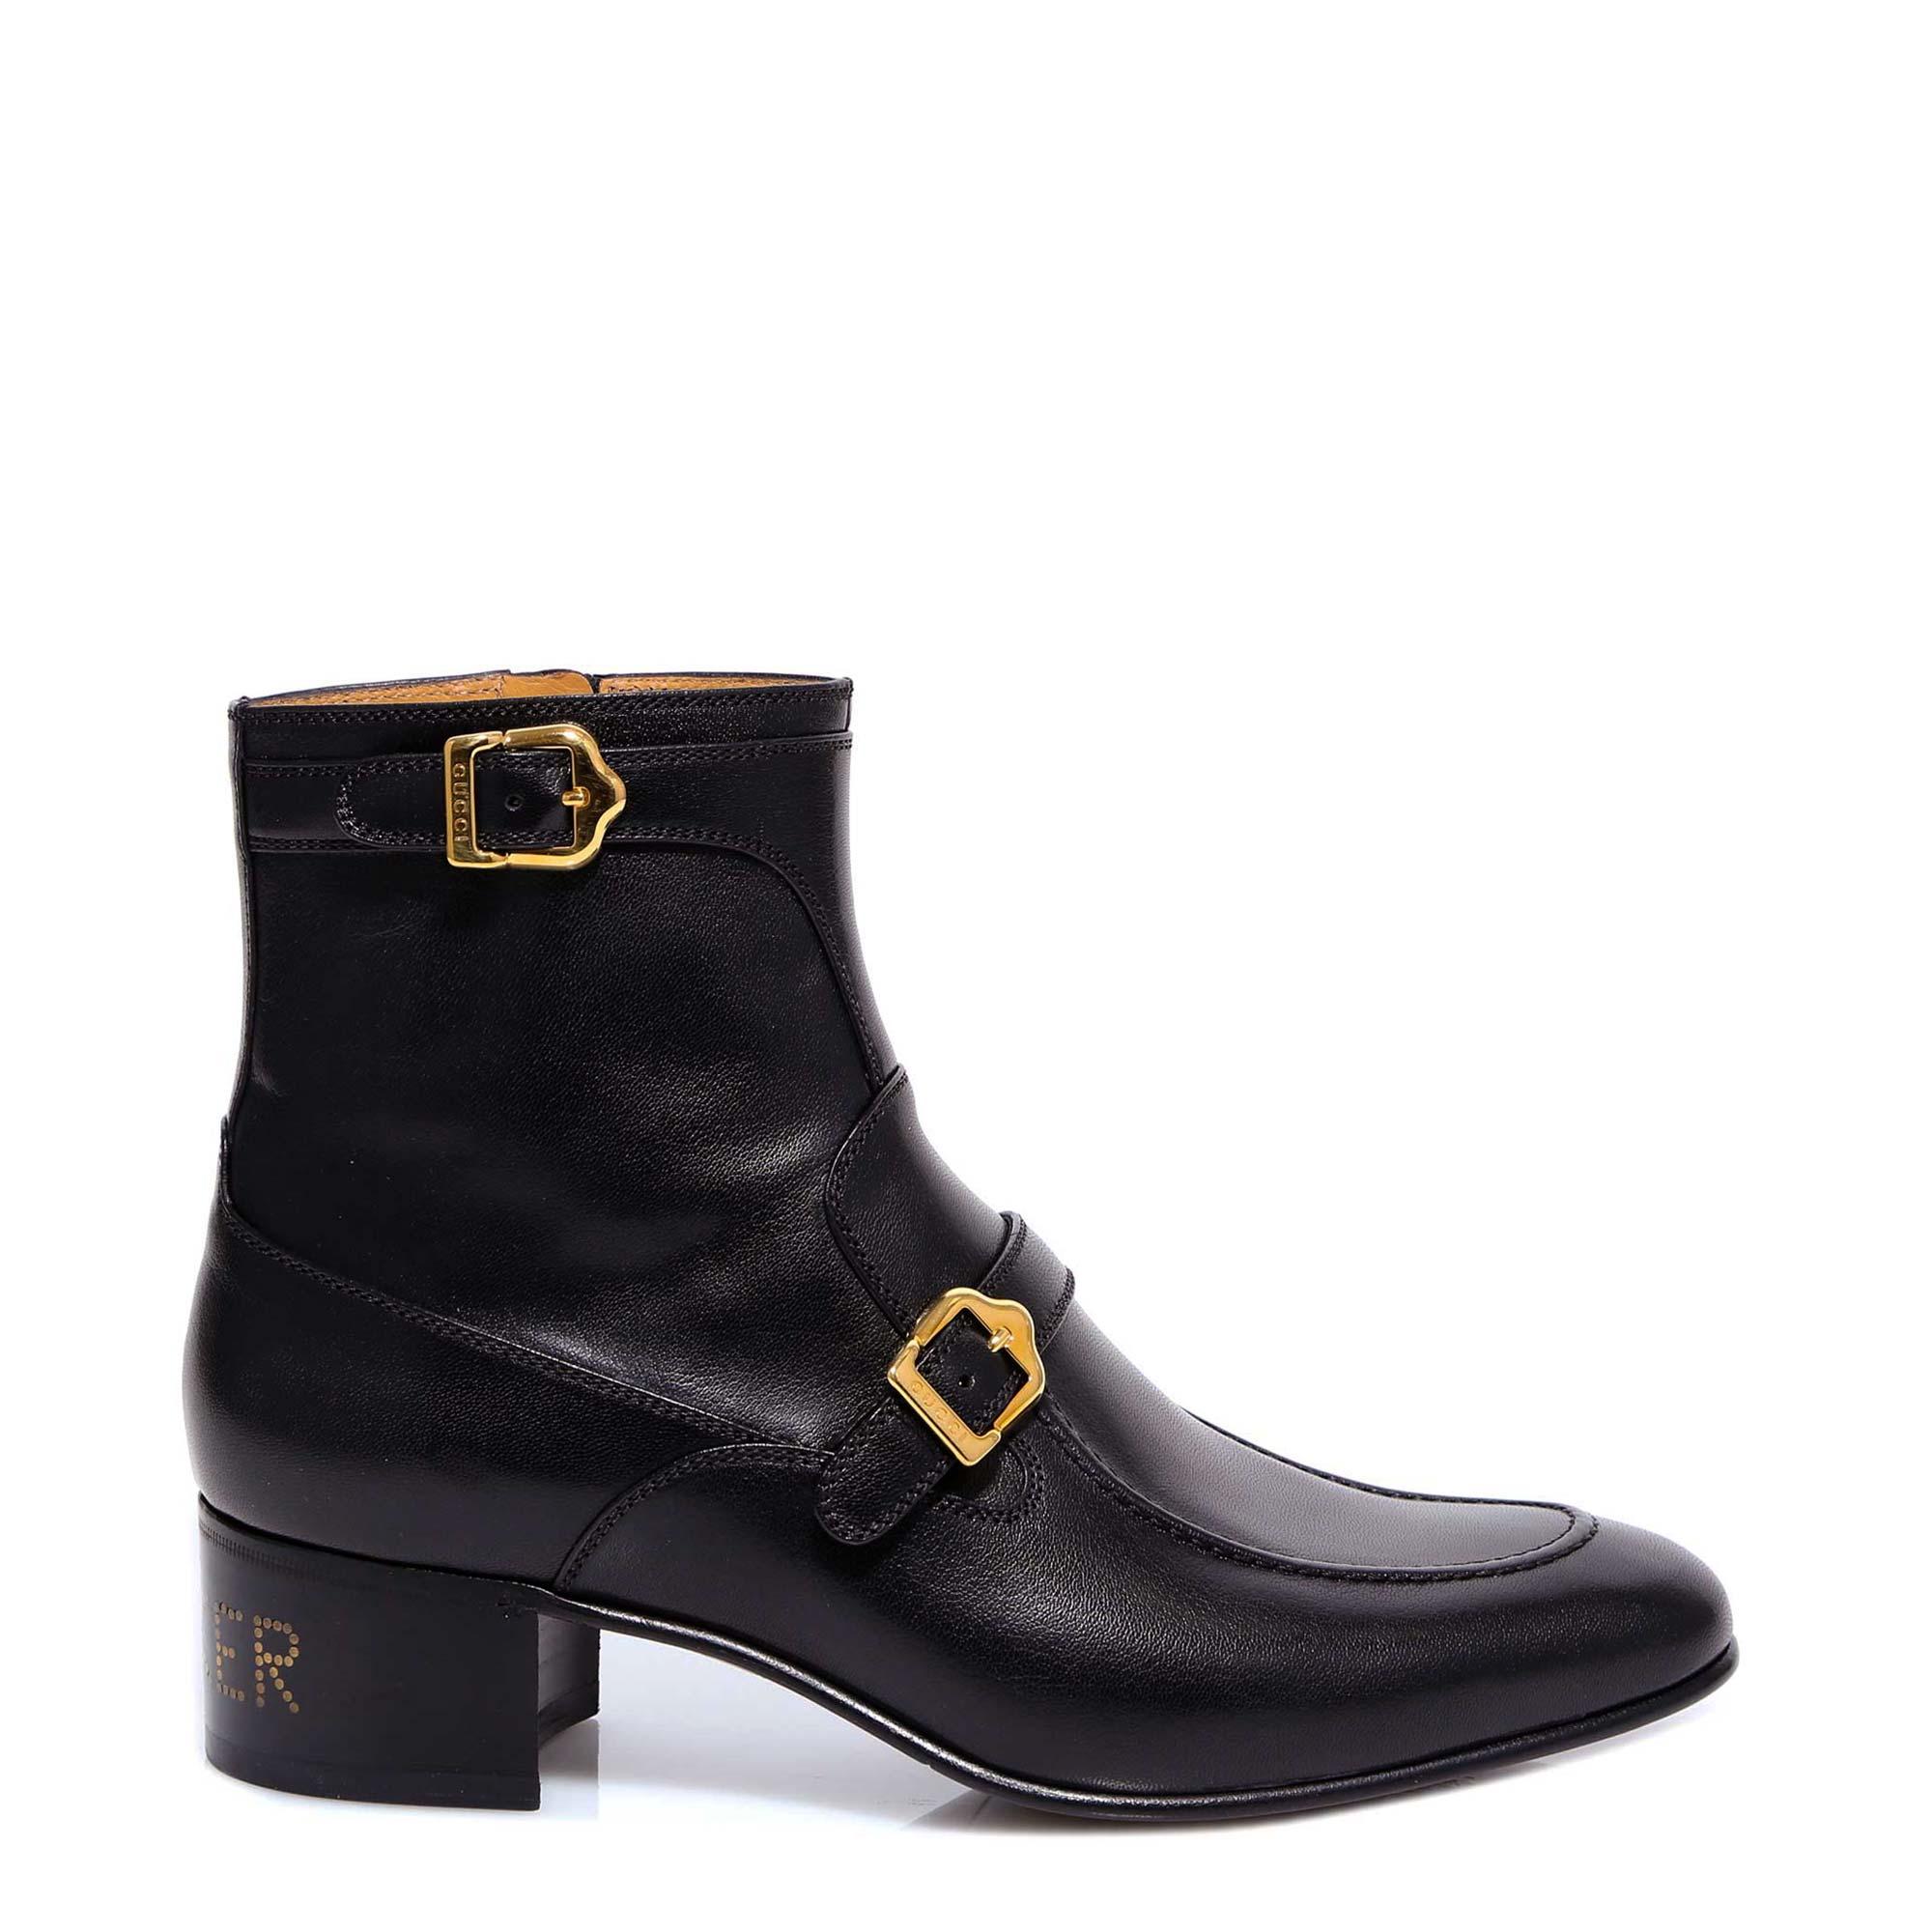 Gucci Sucker Leather Boots in Black for Men